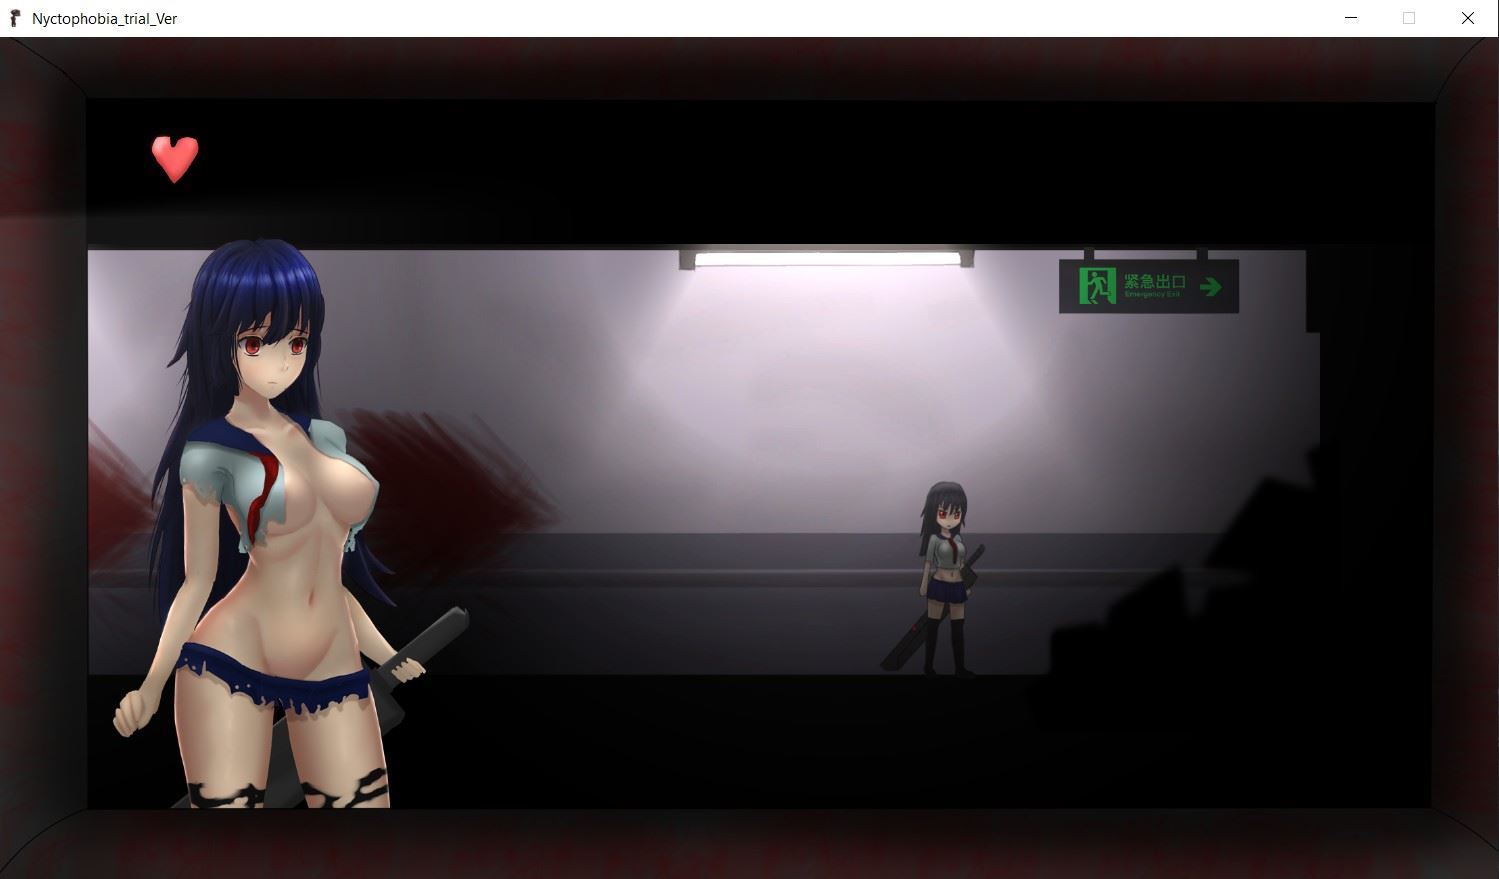 Flash action hentai game фото 26